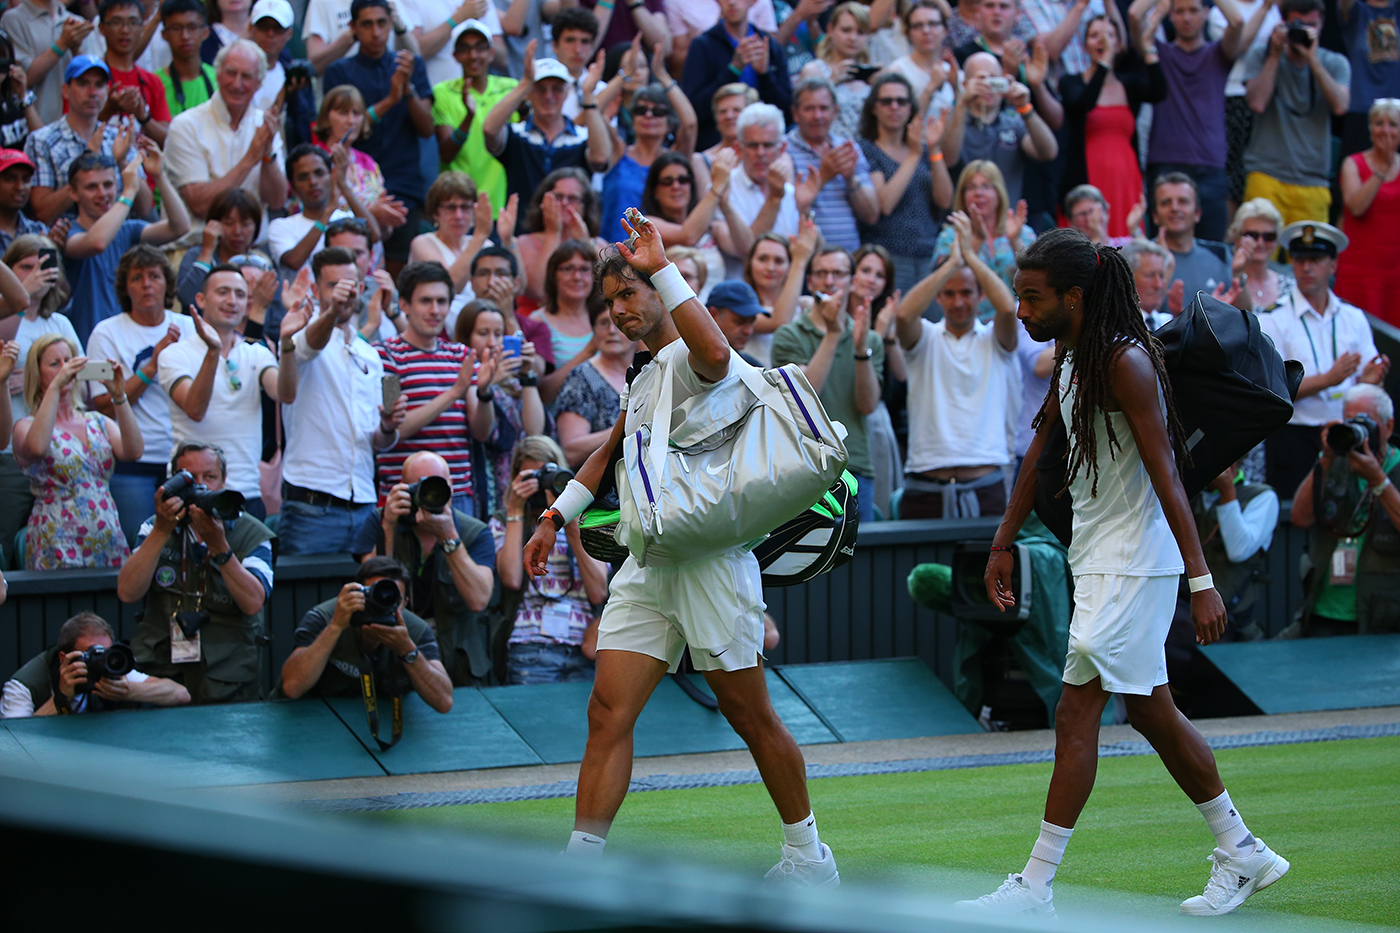 Upset On Centre Court Brown Defeats Nadal The Championships Wimbledon Official Site By Ibm 6741